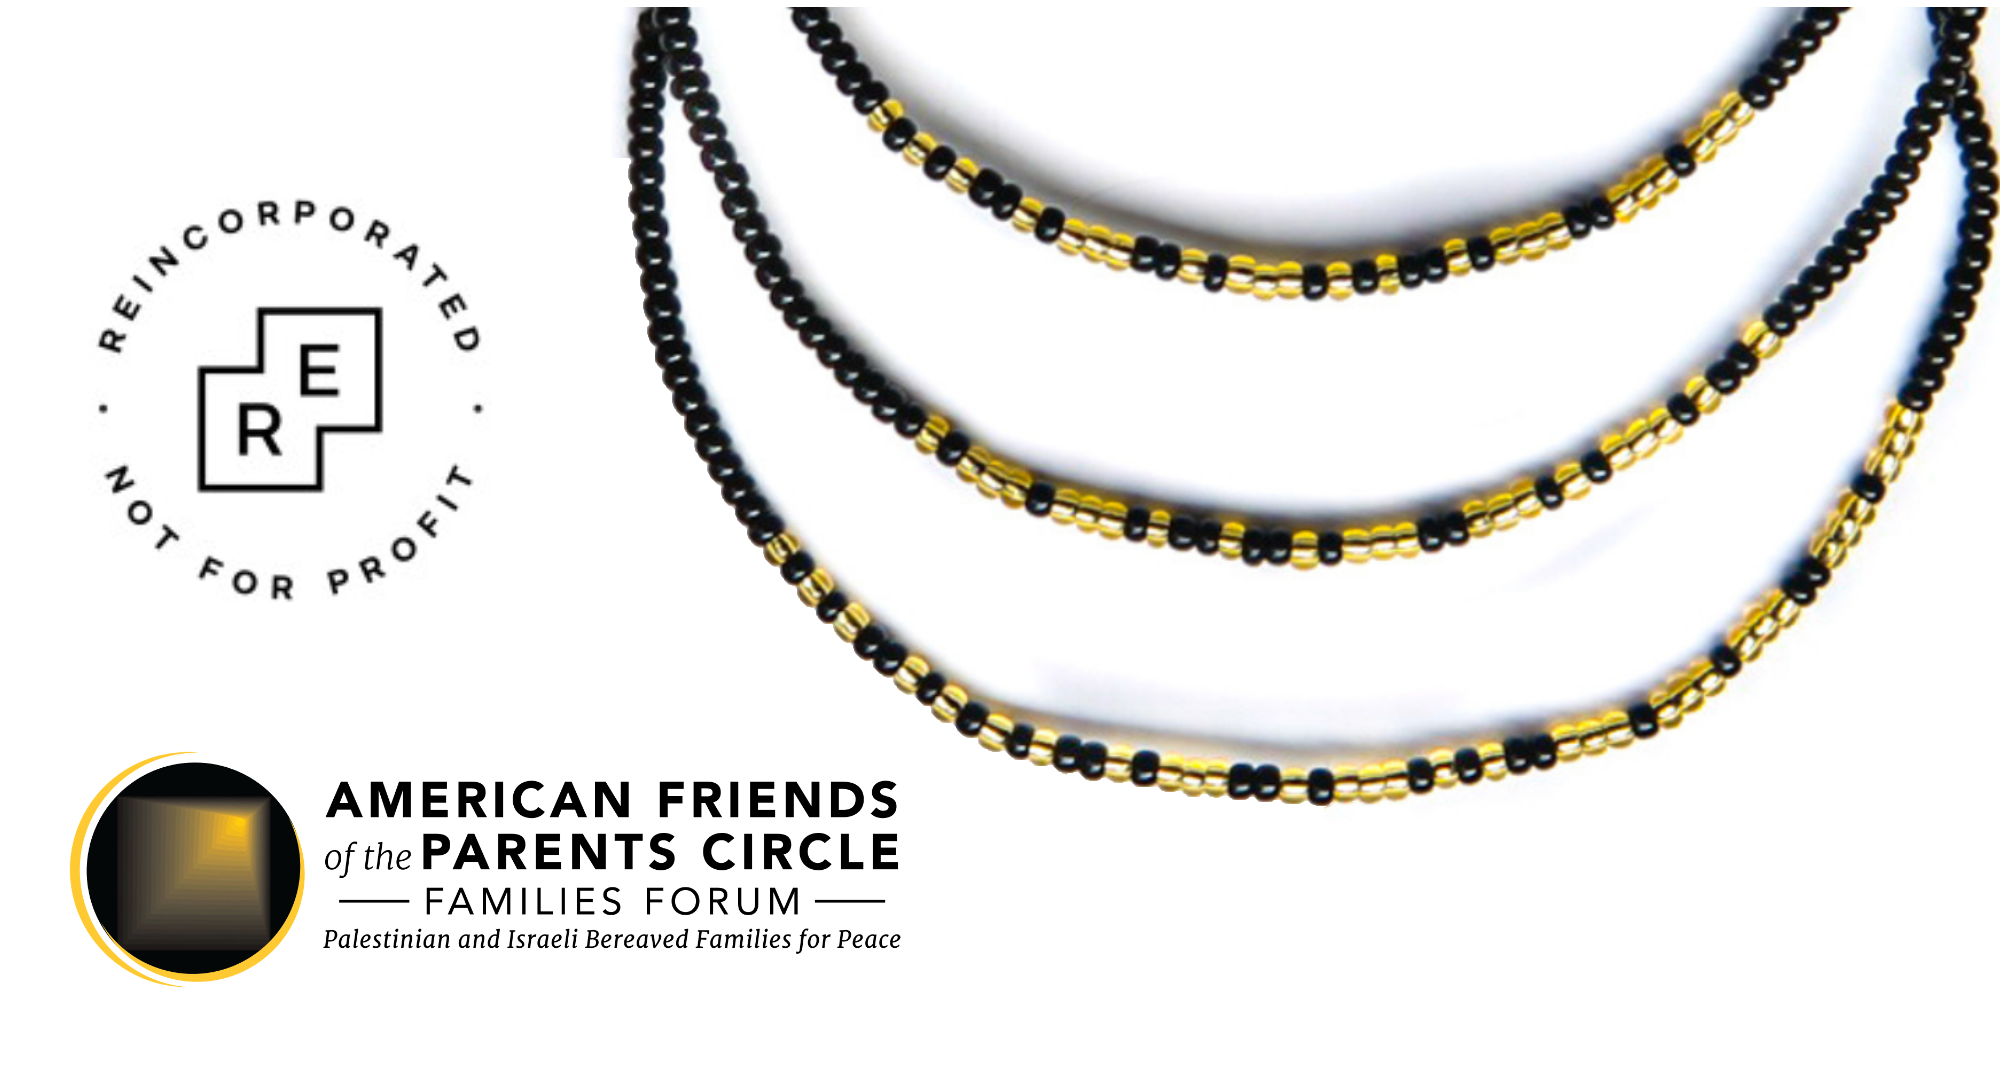 American Friends of the Parents Circle Morse Code Bracelet Now Available